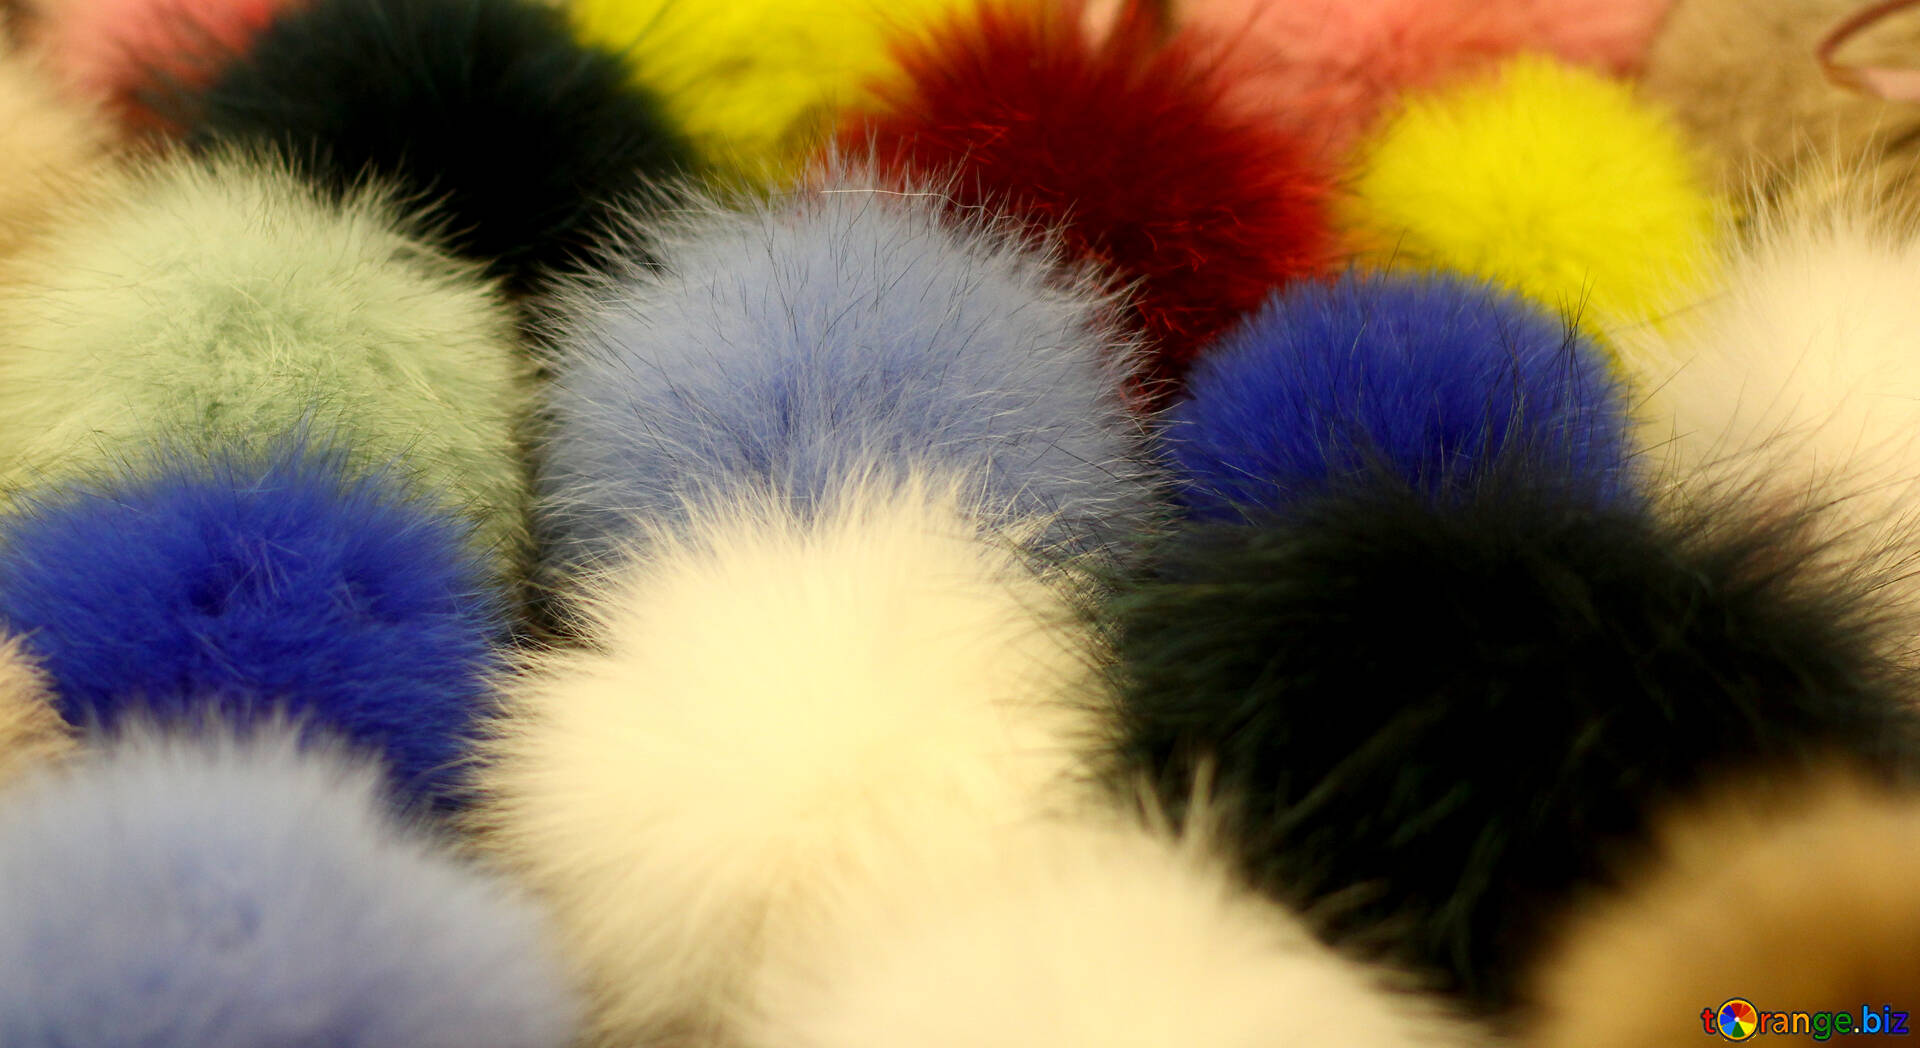 Kids toys image fluffy balls pom poms what is your favorite color images toy № 52971 | torange.biz free pics on cc-by license